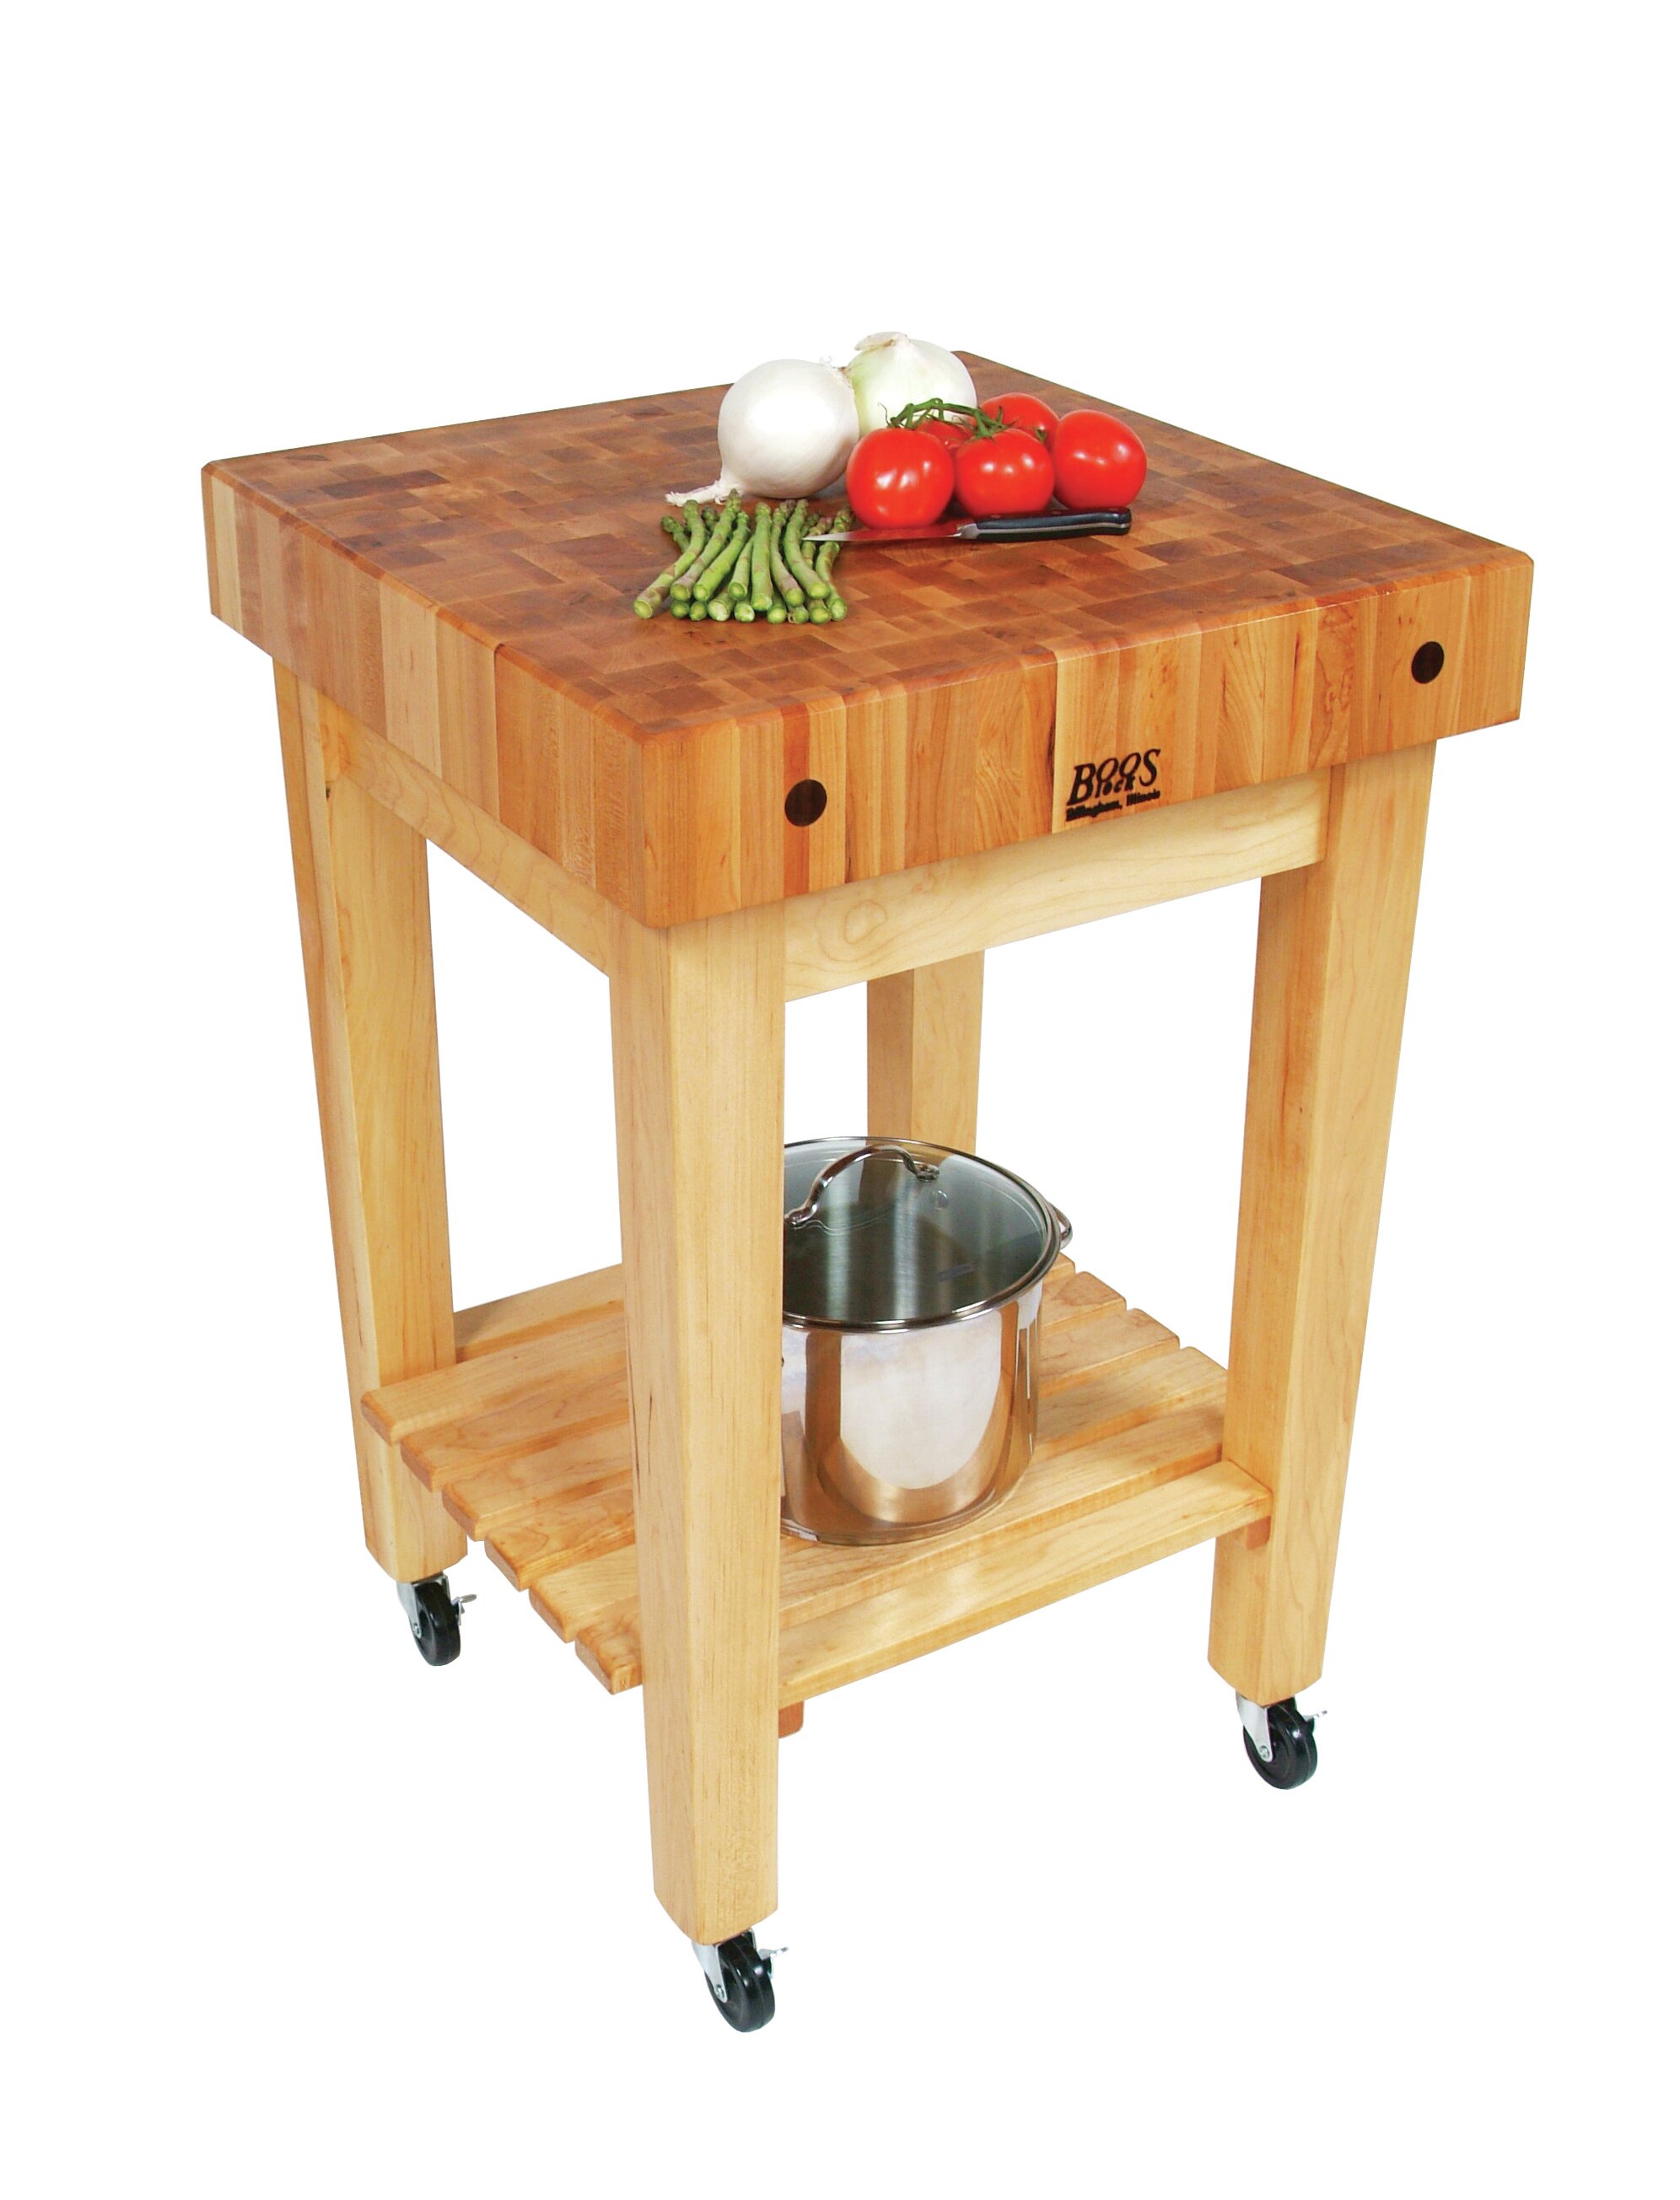 John Boos AB Block with a 10 Thick Maple Butcher Block - in 5 Sizes